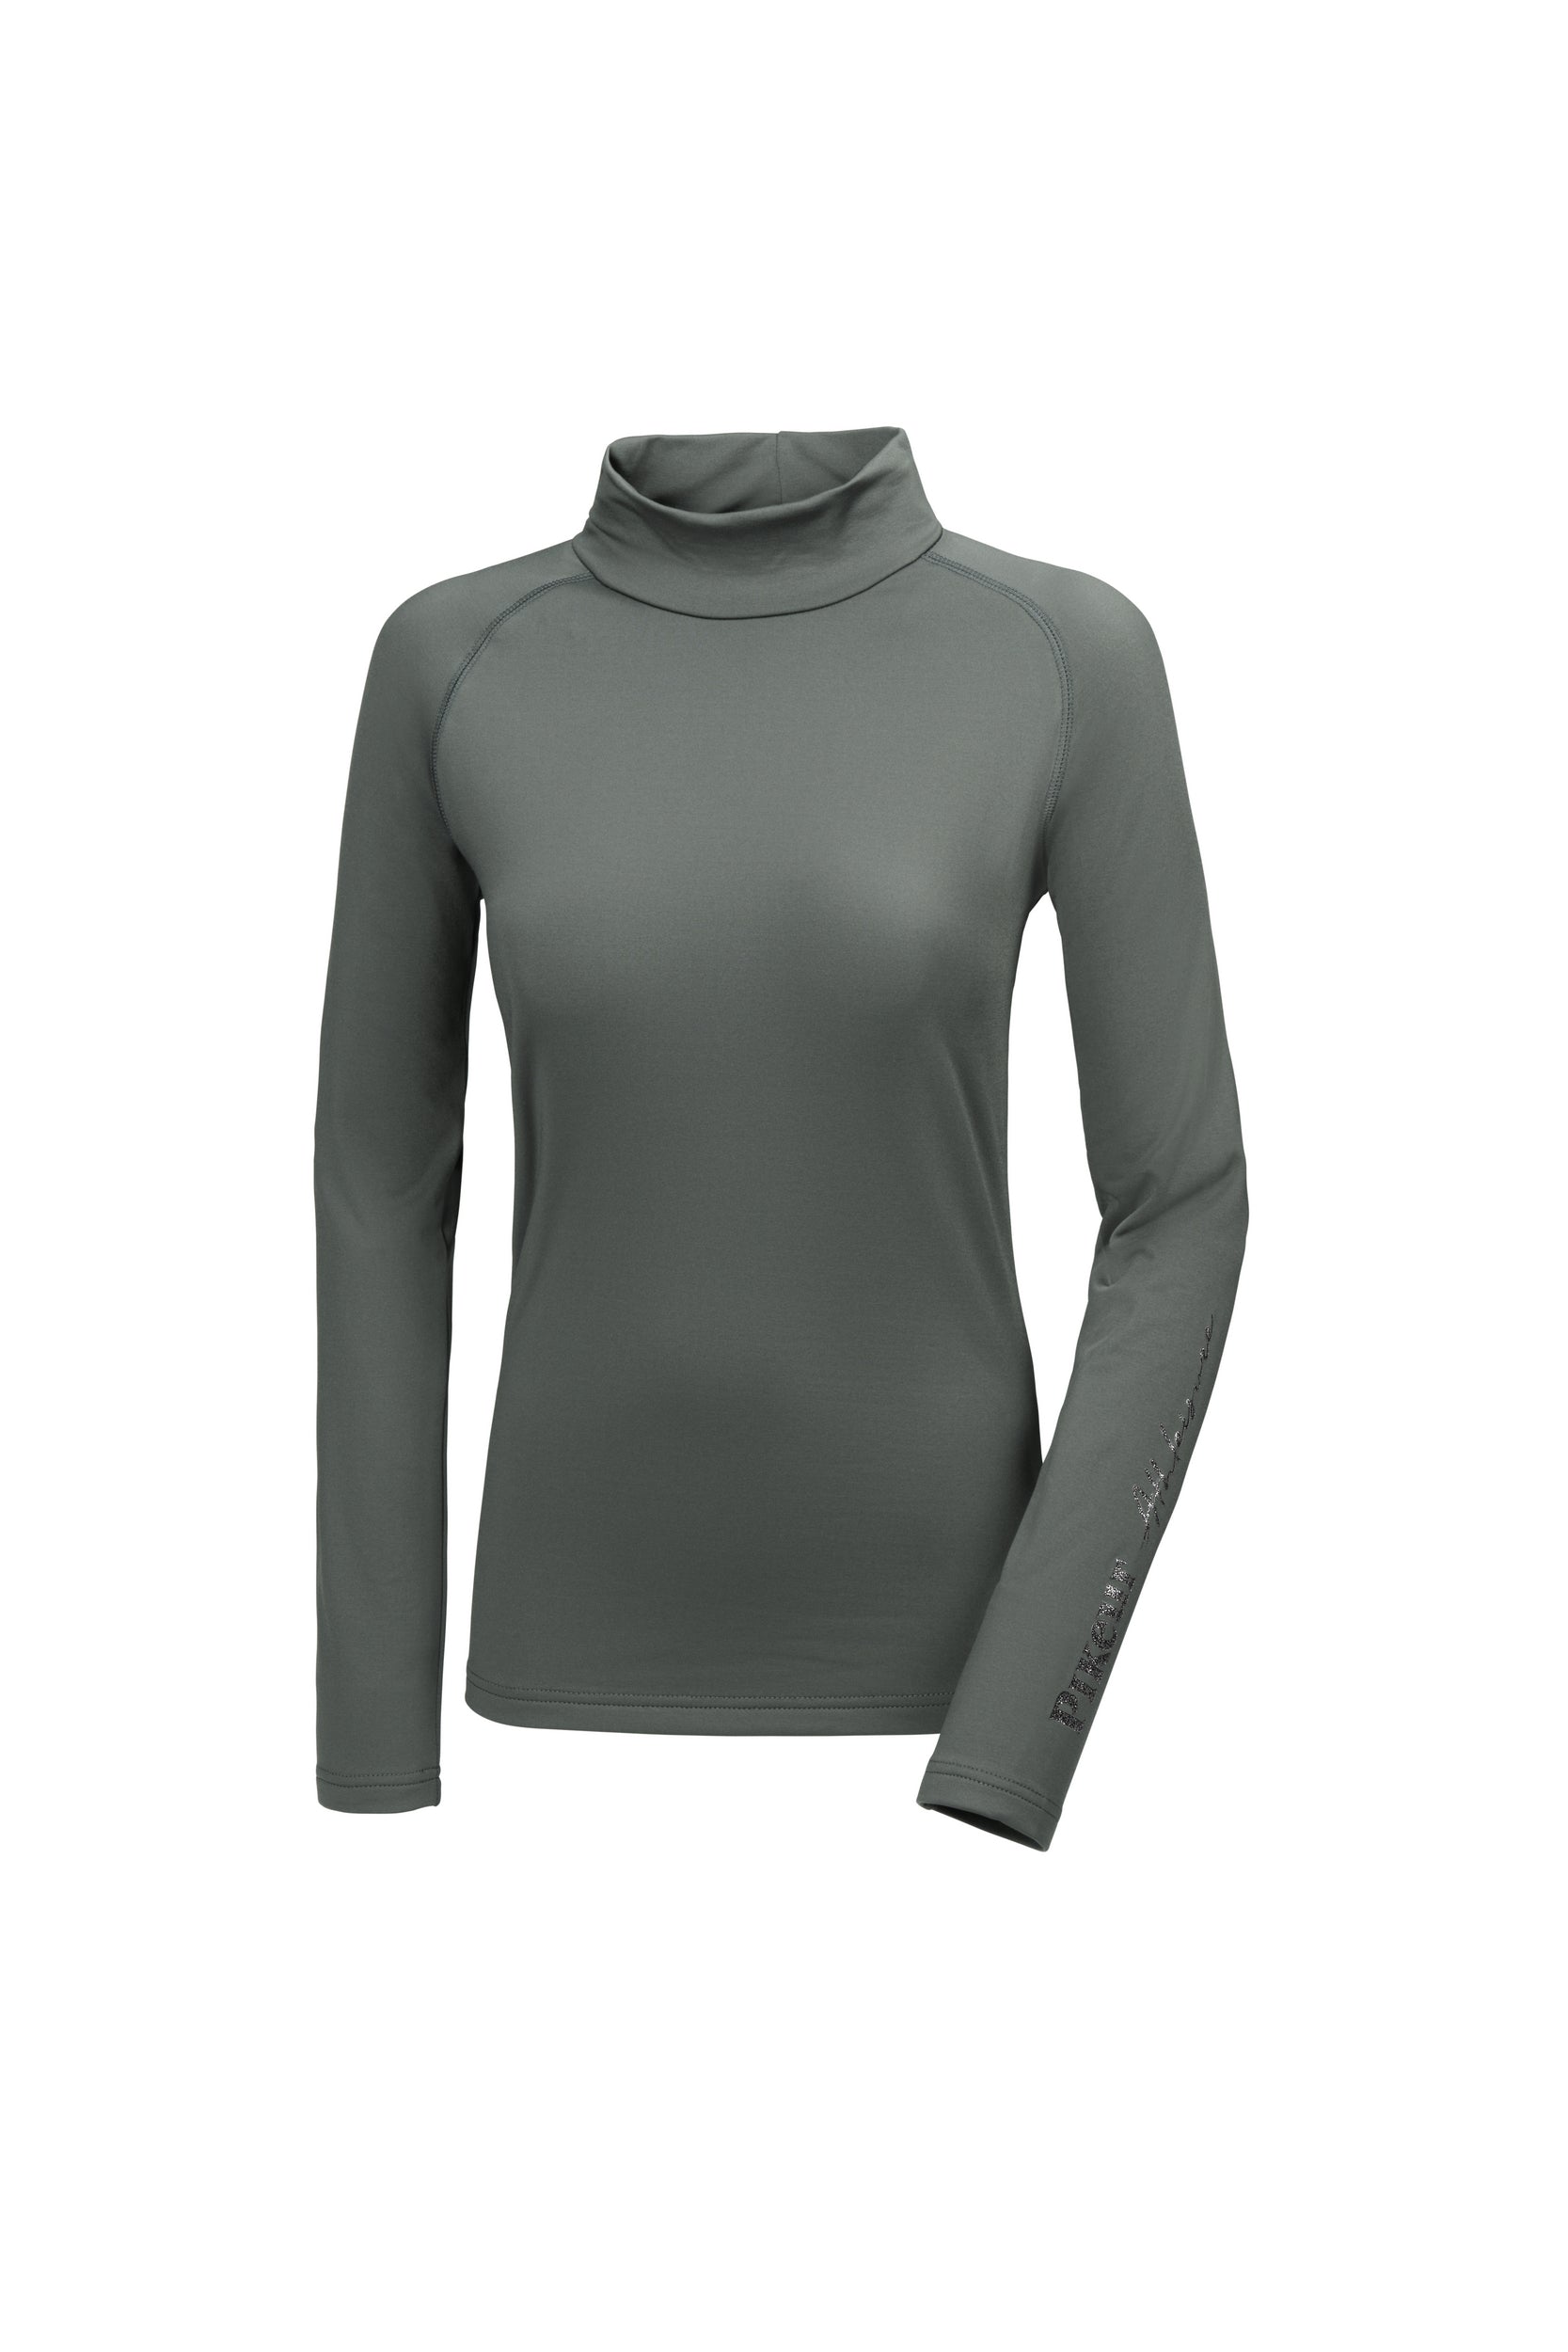 Pikeur Abby Athleisure roll neck in grey